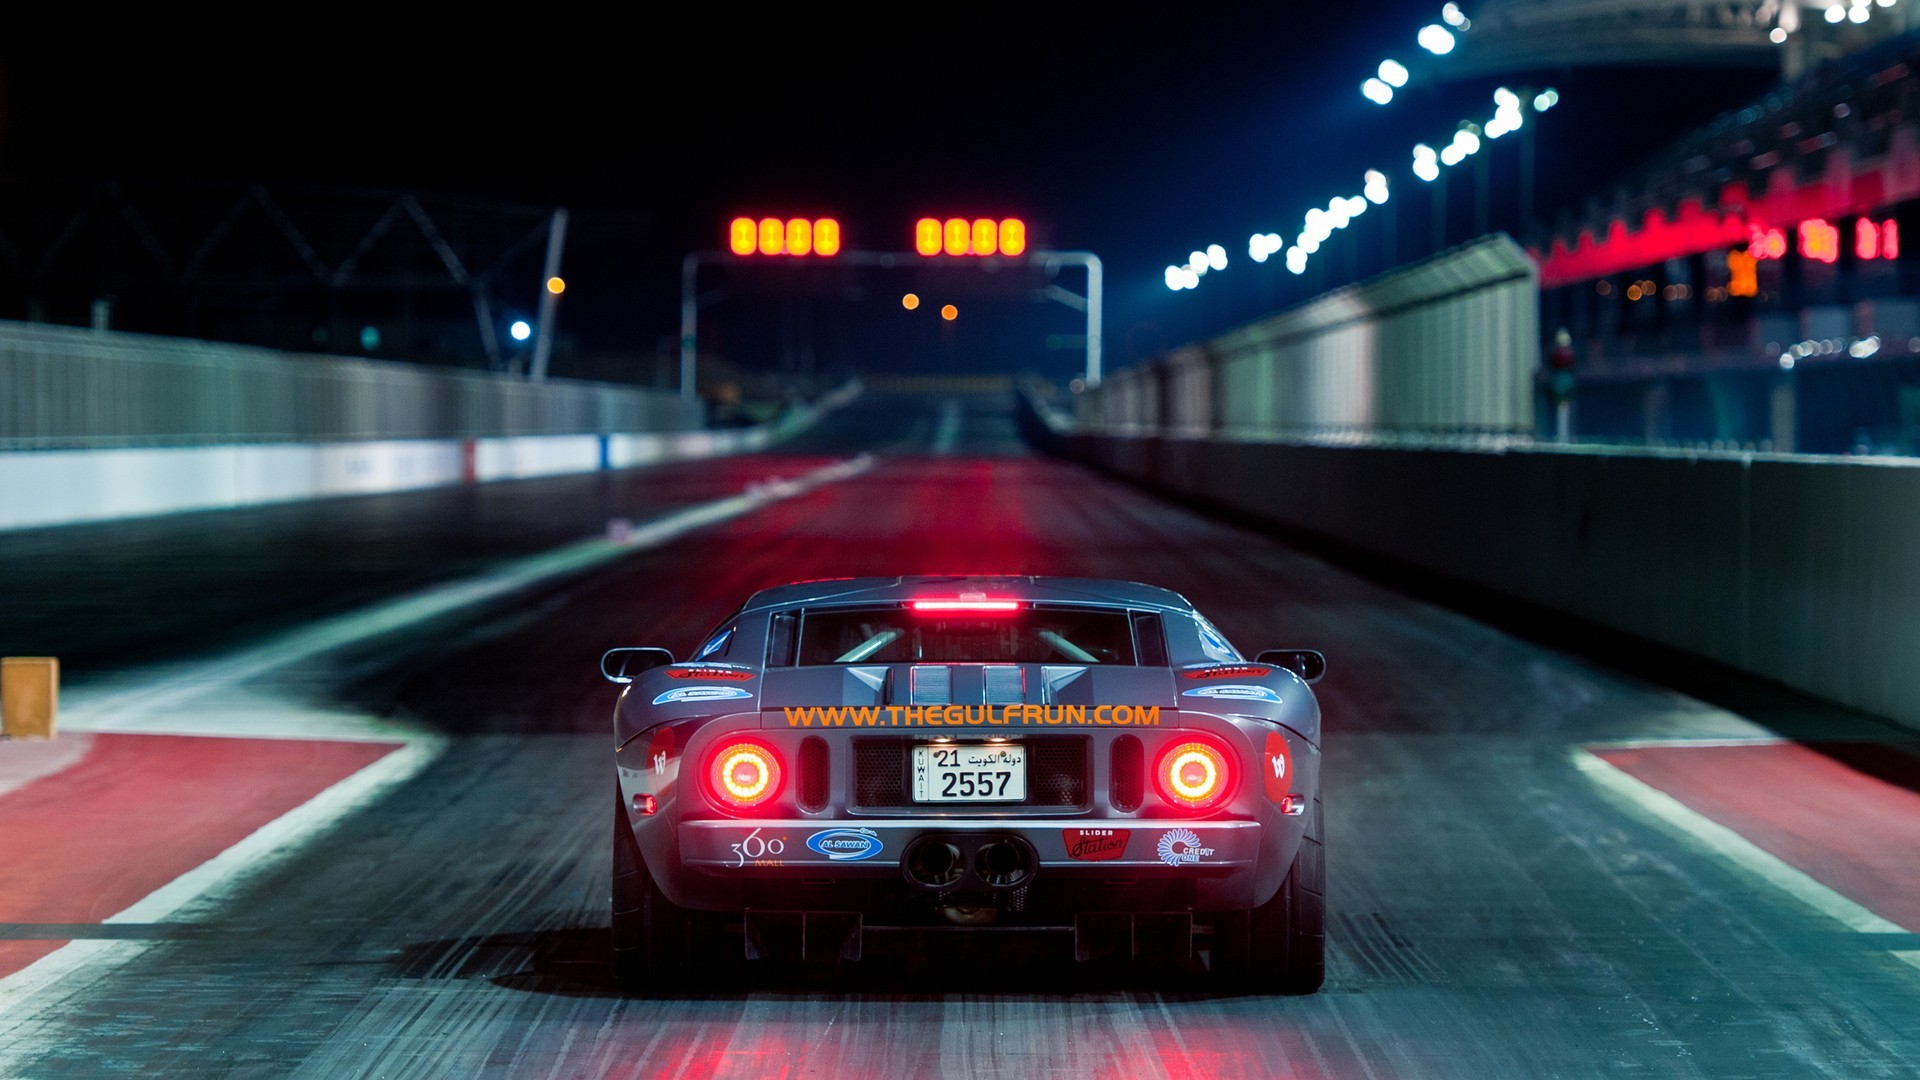 1920x1080 Ford Gt Collection: .LPZLPZ Ford Gt Wallpapers